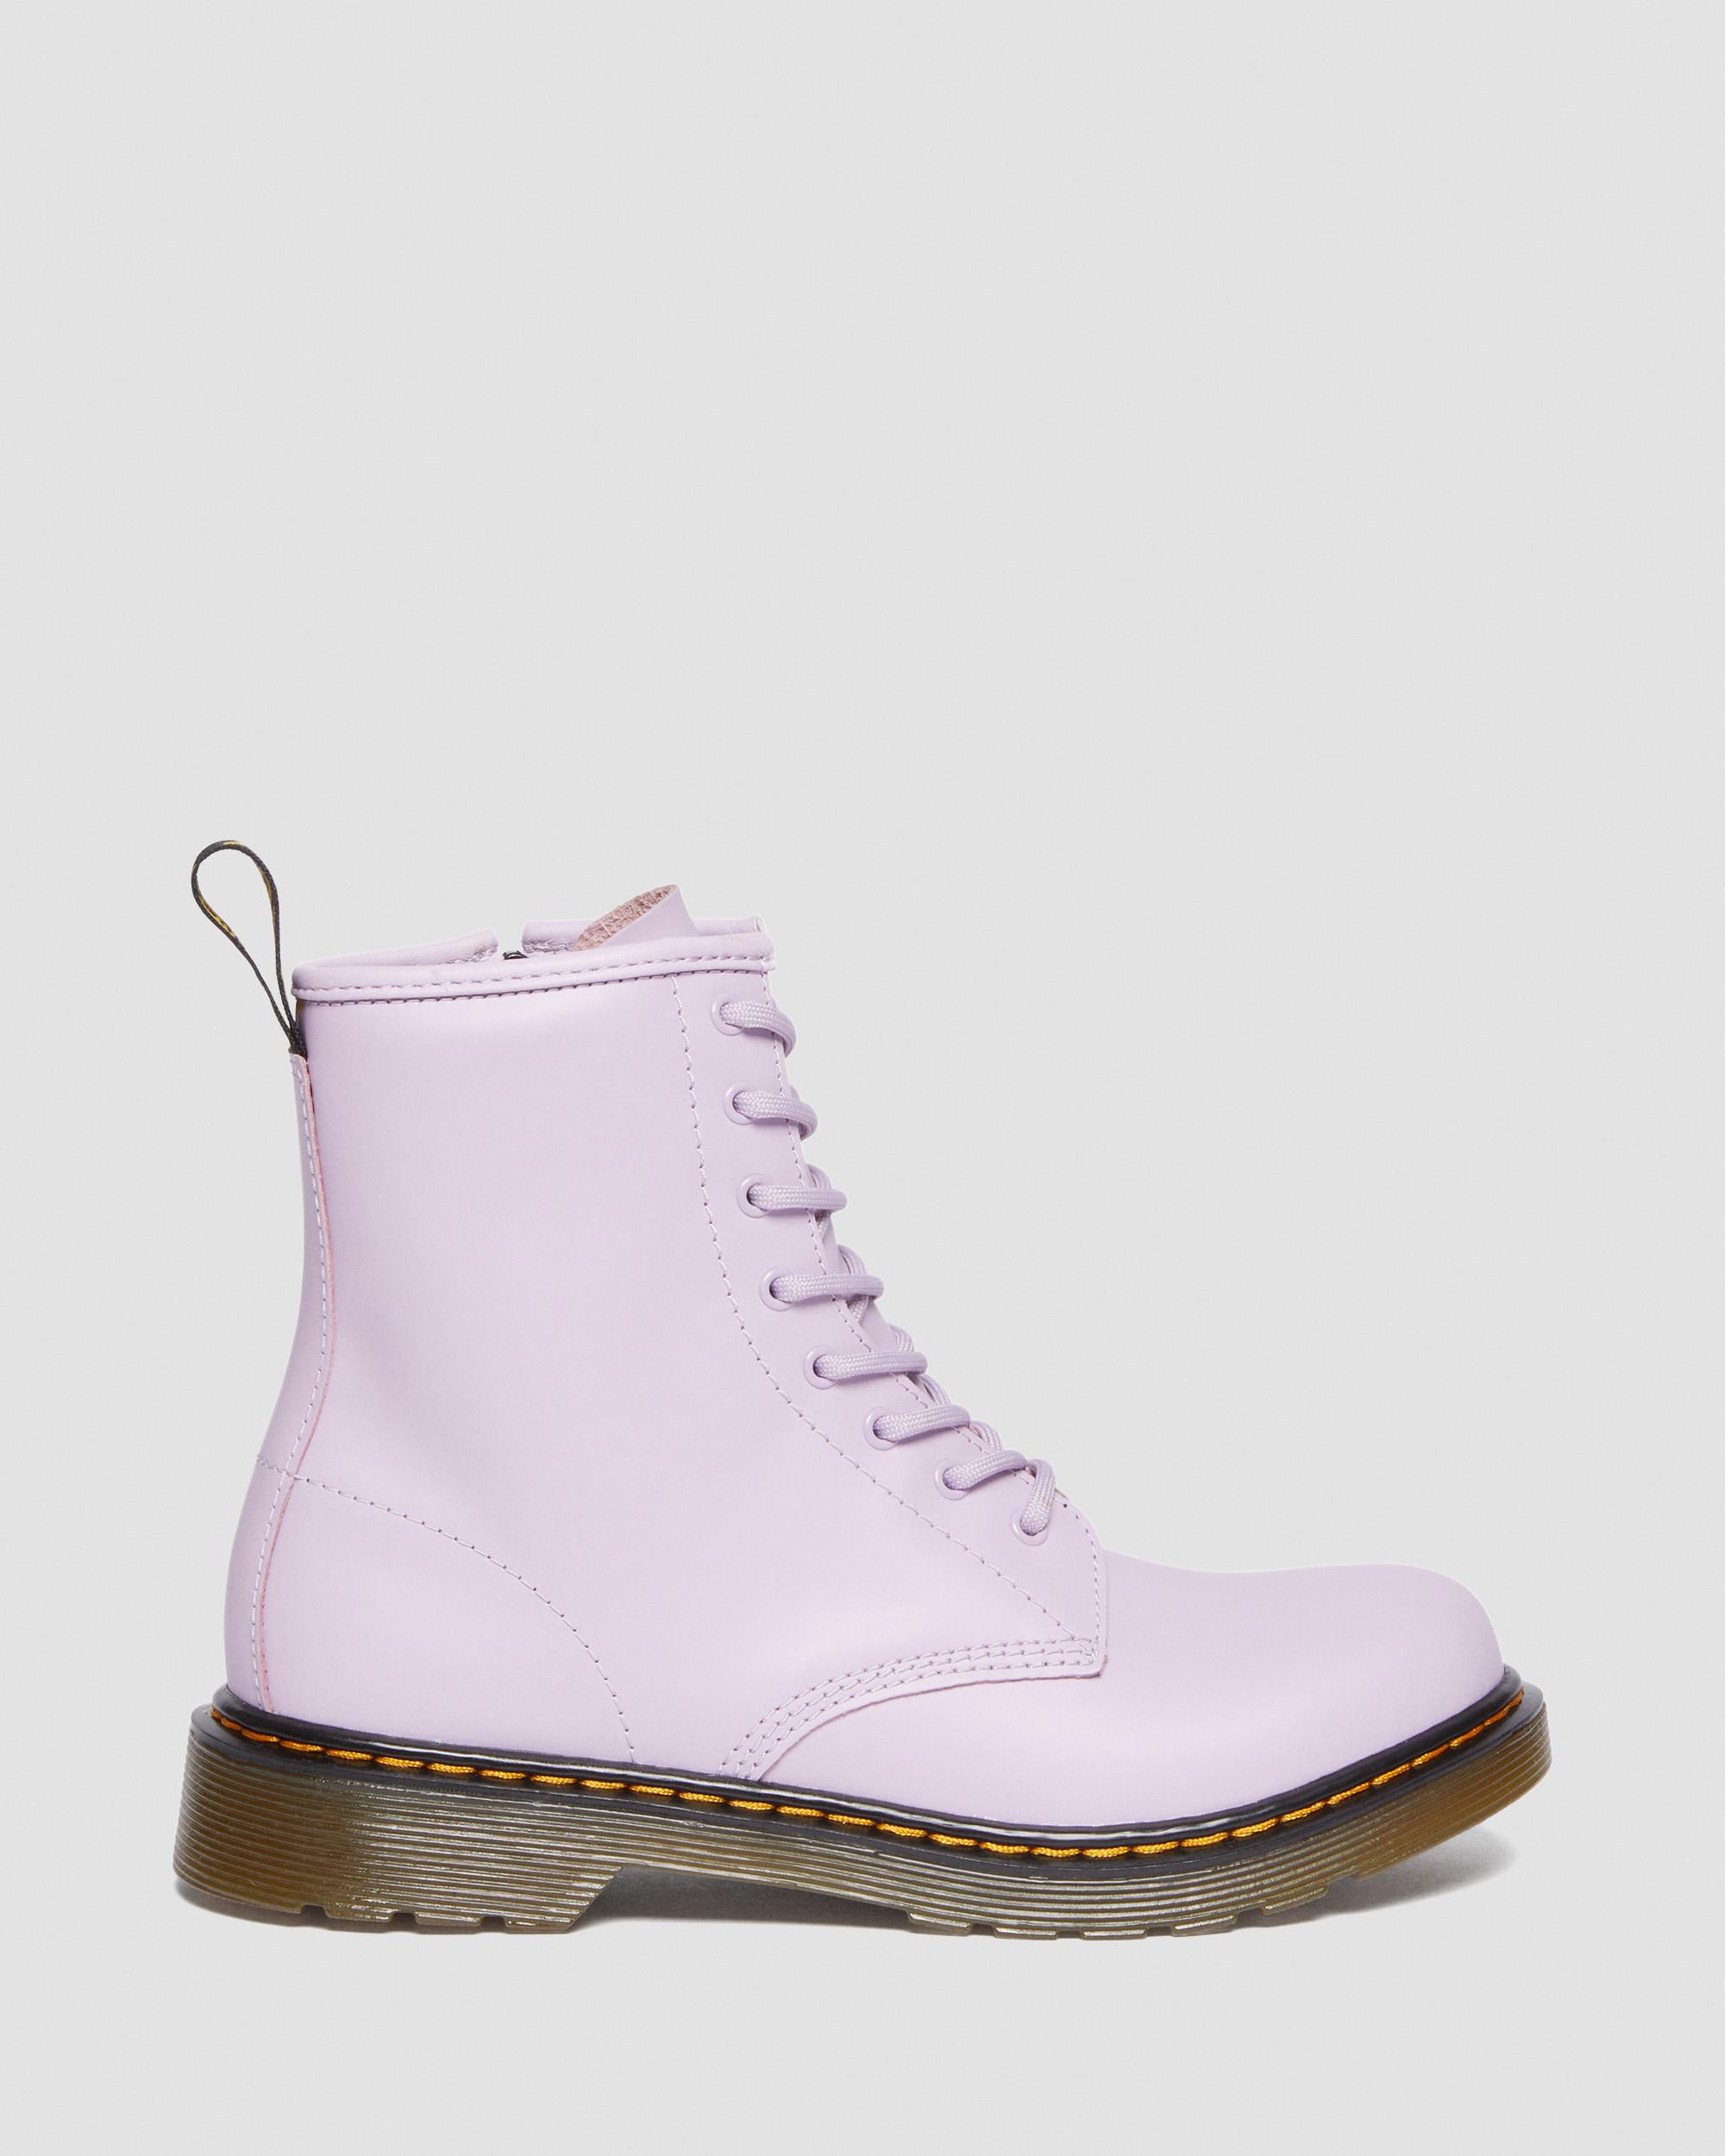 Youth 1460 Romario Leather Up Lace Lilac Boots Martens | in Dr